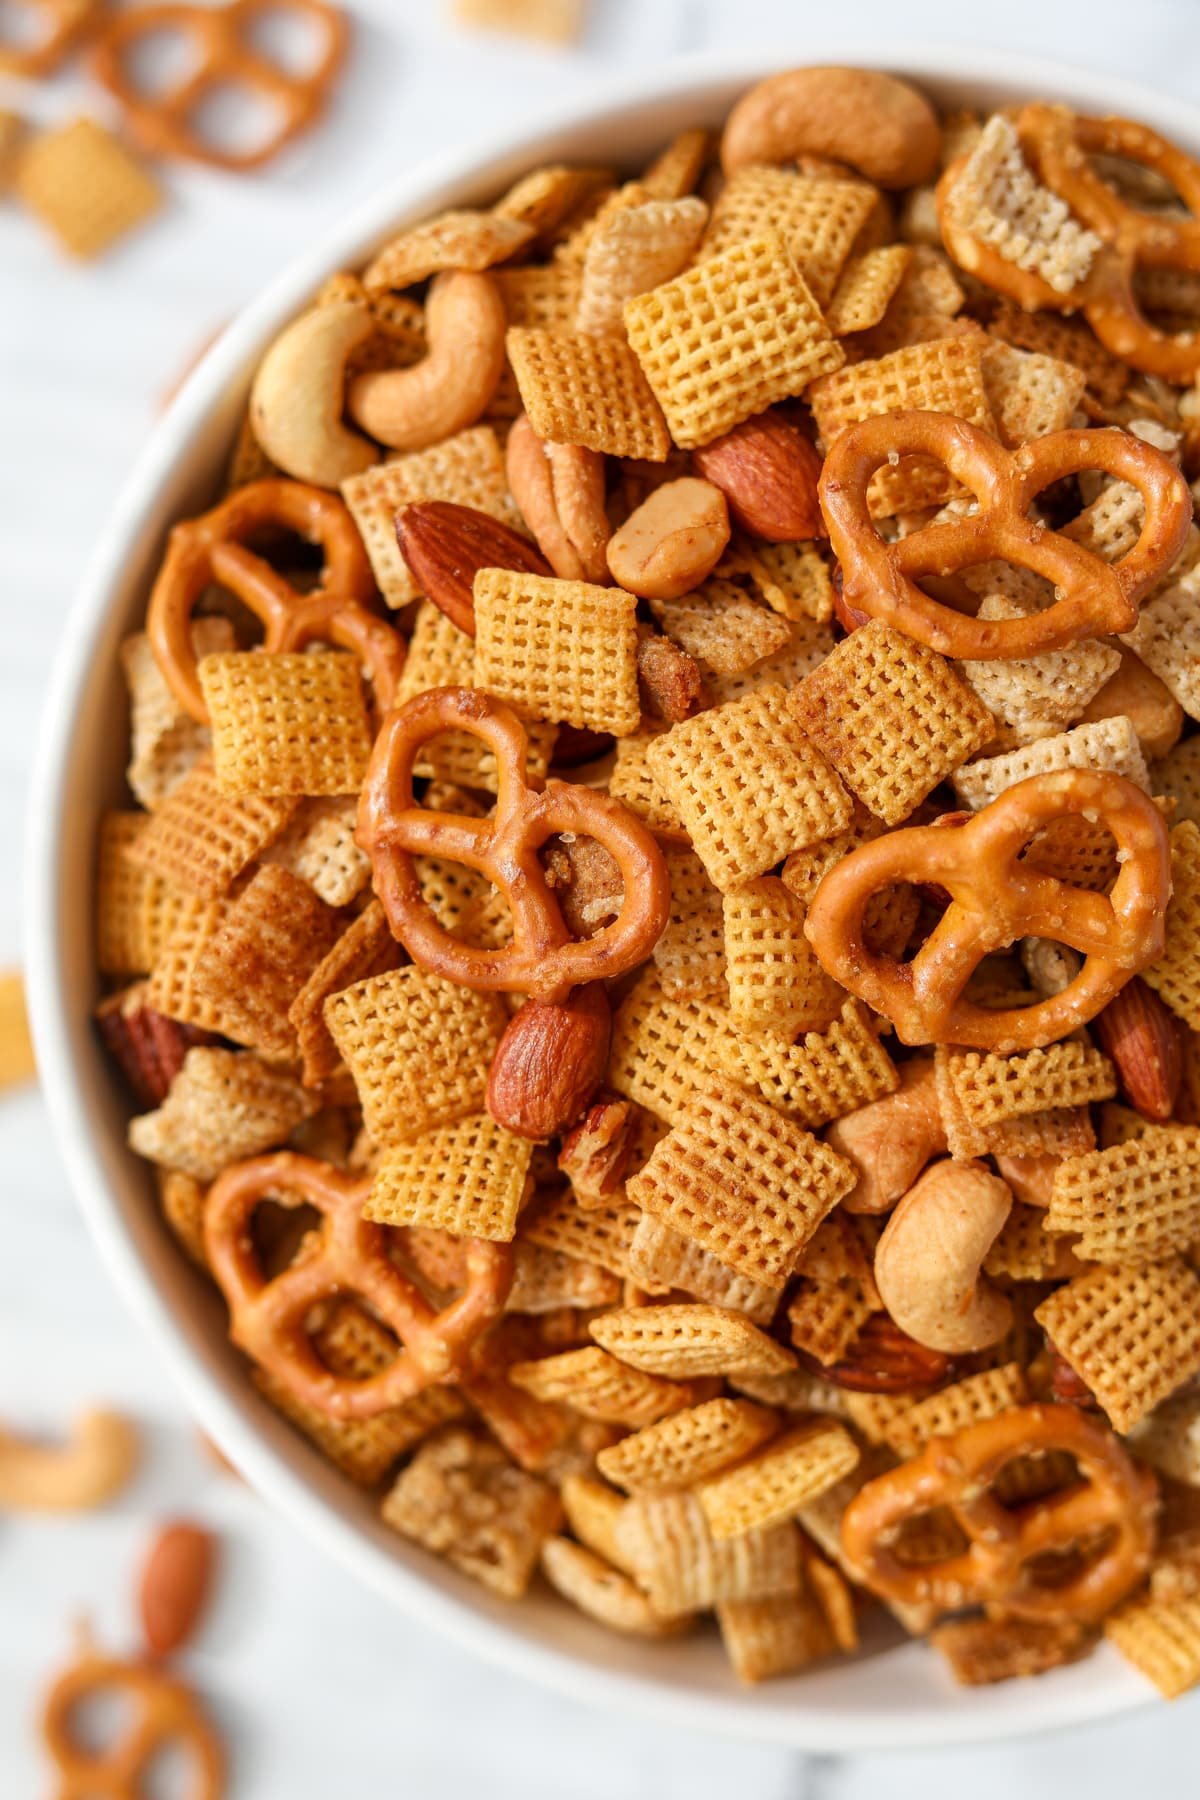 A white bowl filled with a pretzel and cereal snack mix.